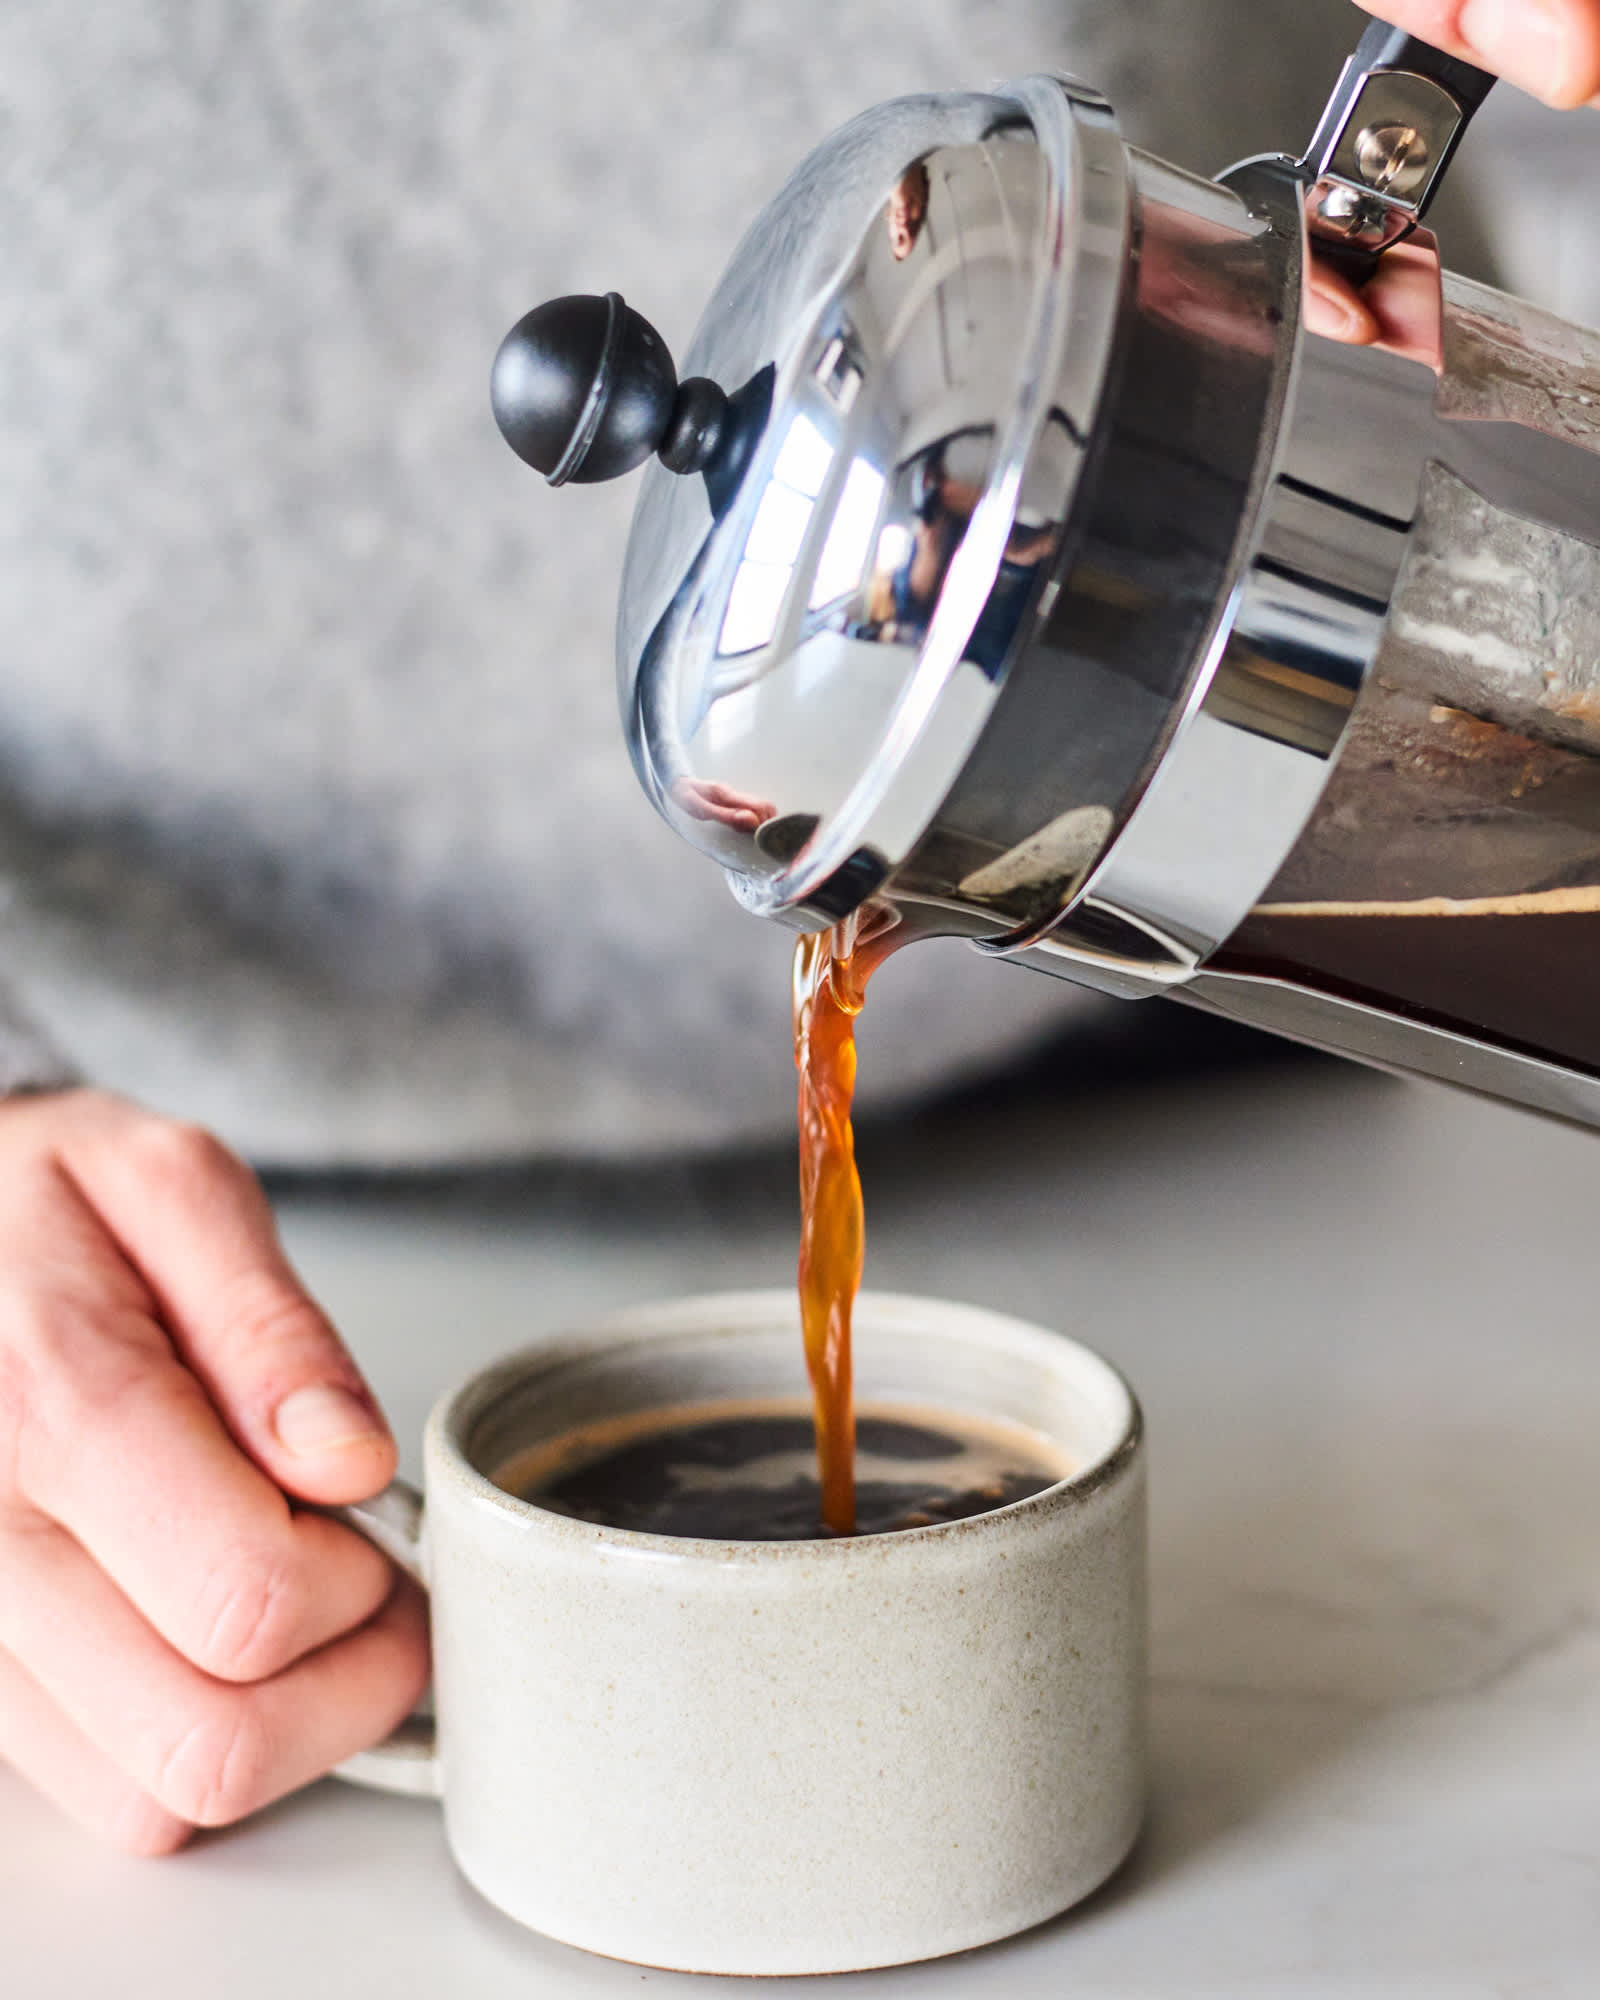 Here's a List of All Our Favorite Coffee Essentials